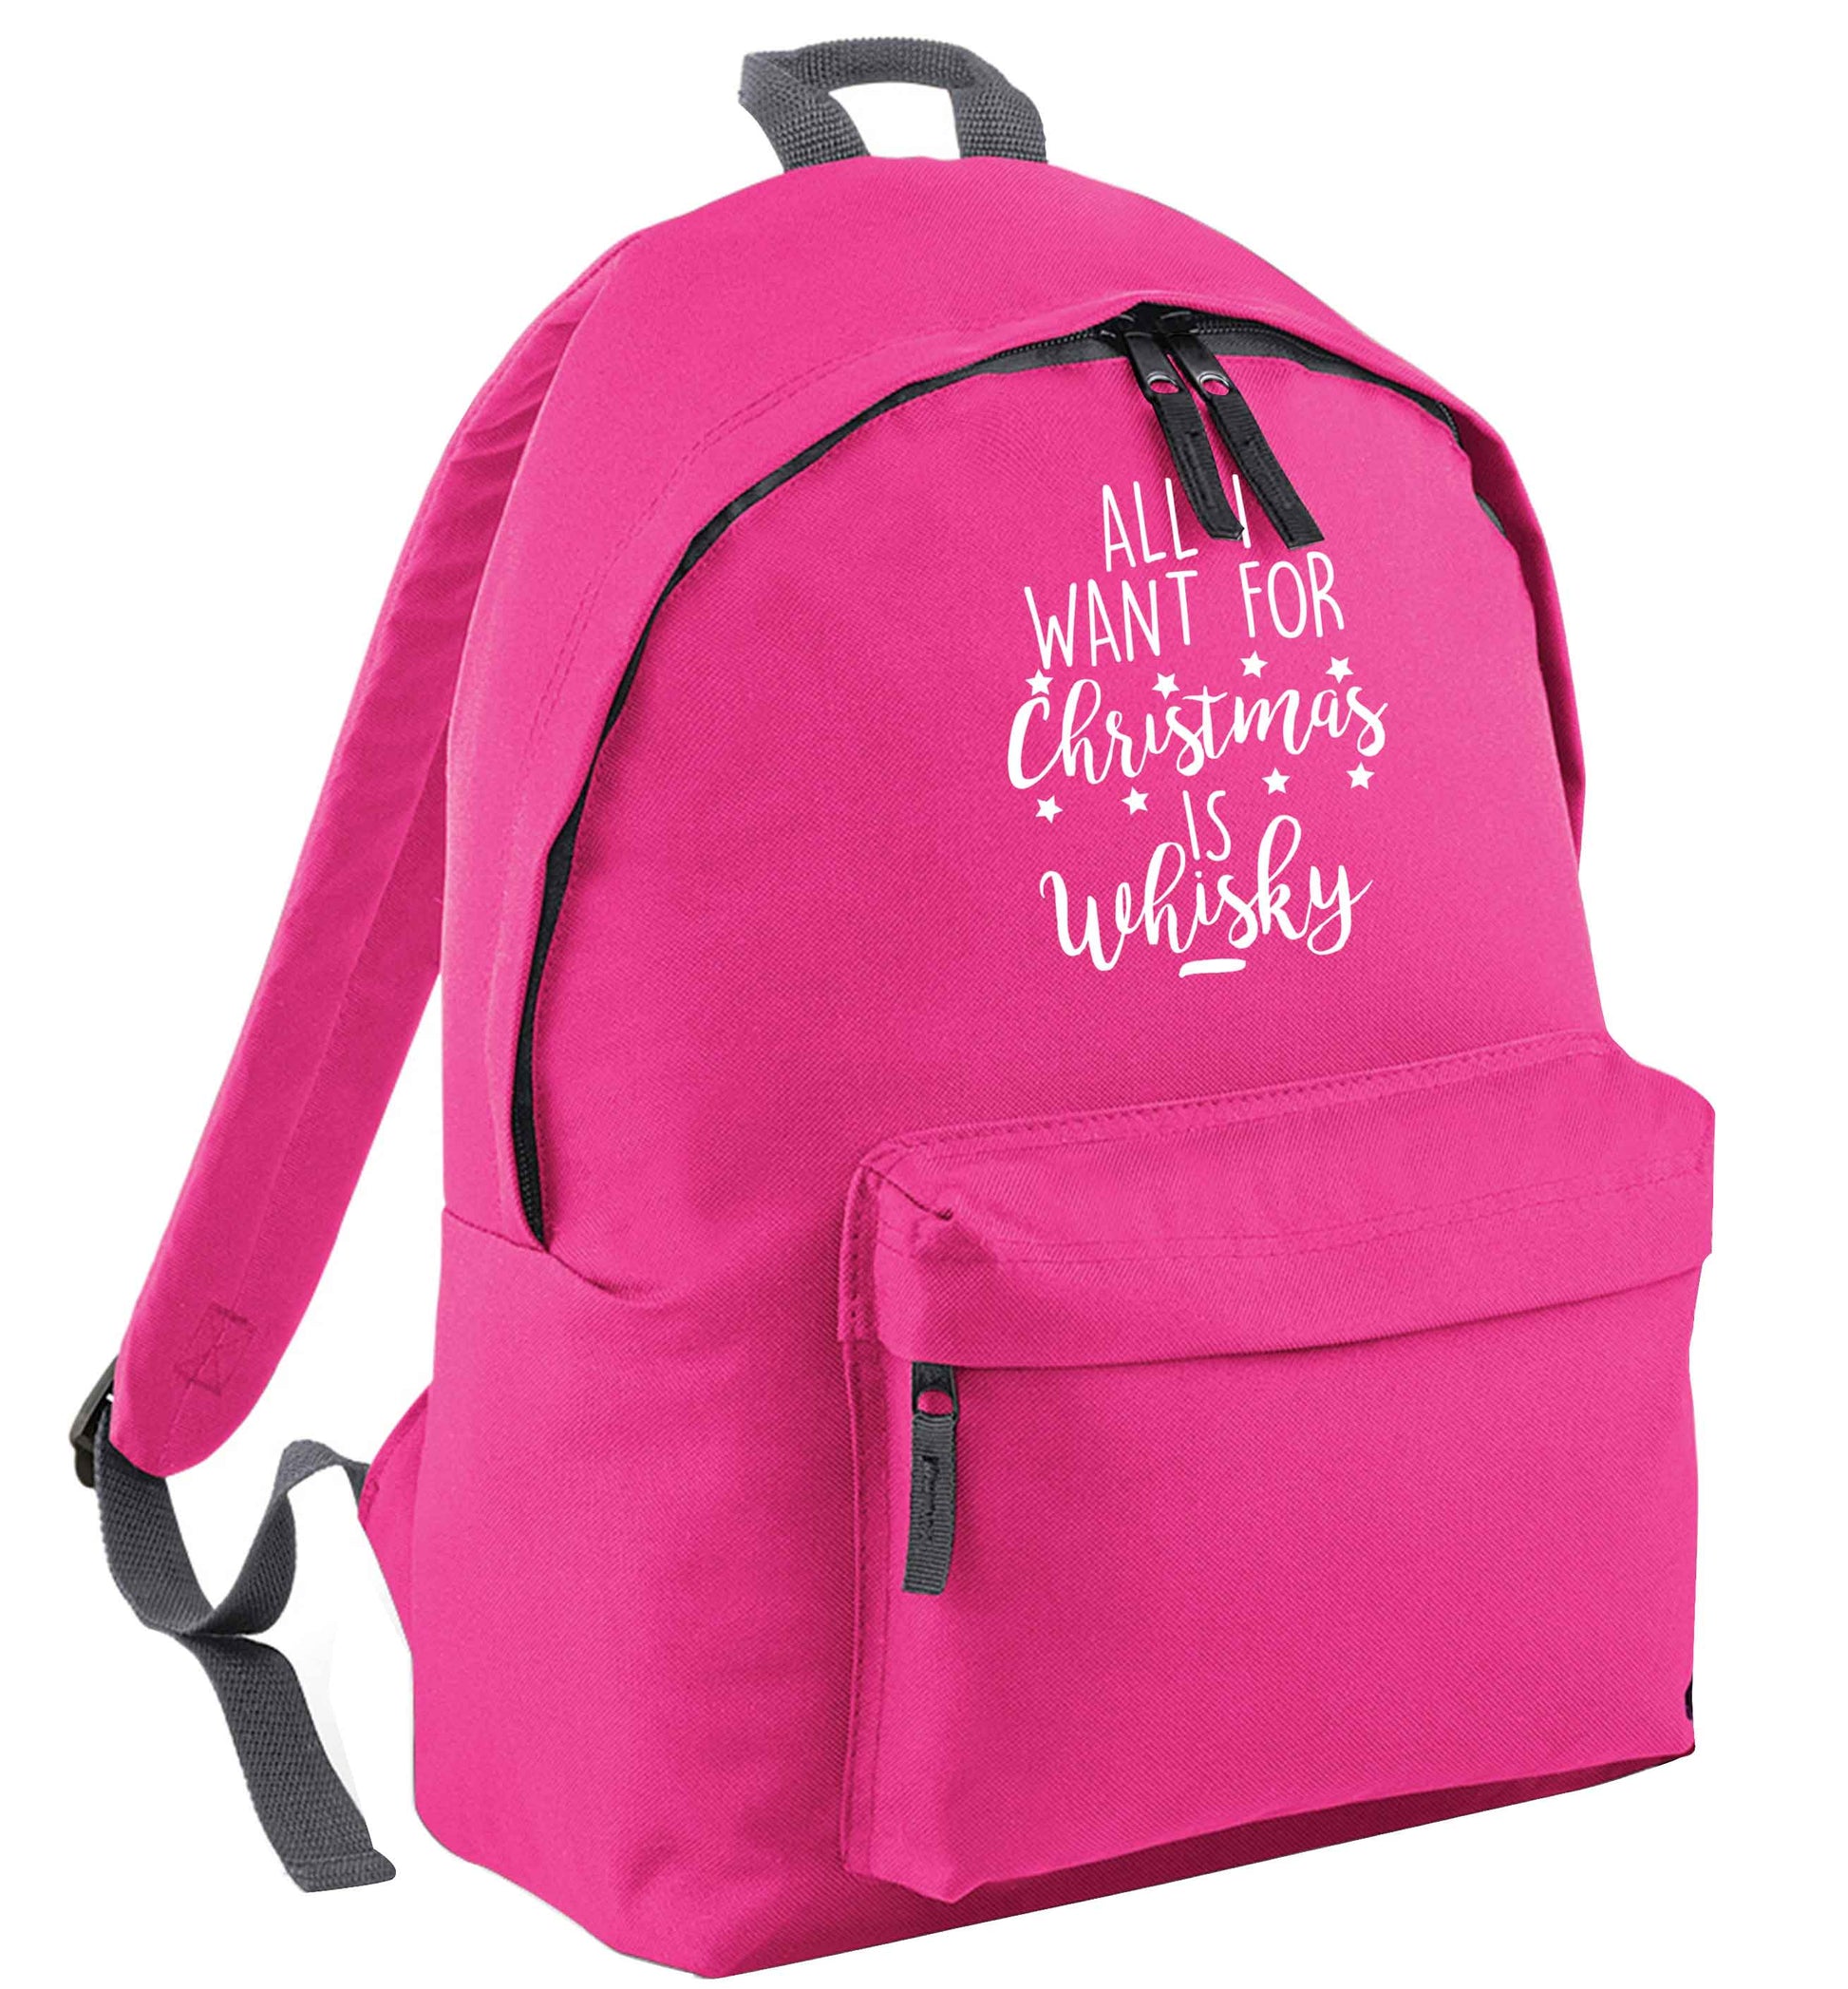 All I want for Christmas is whisky pink adults backpack